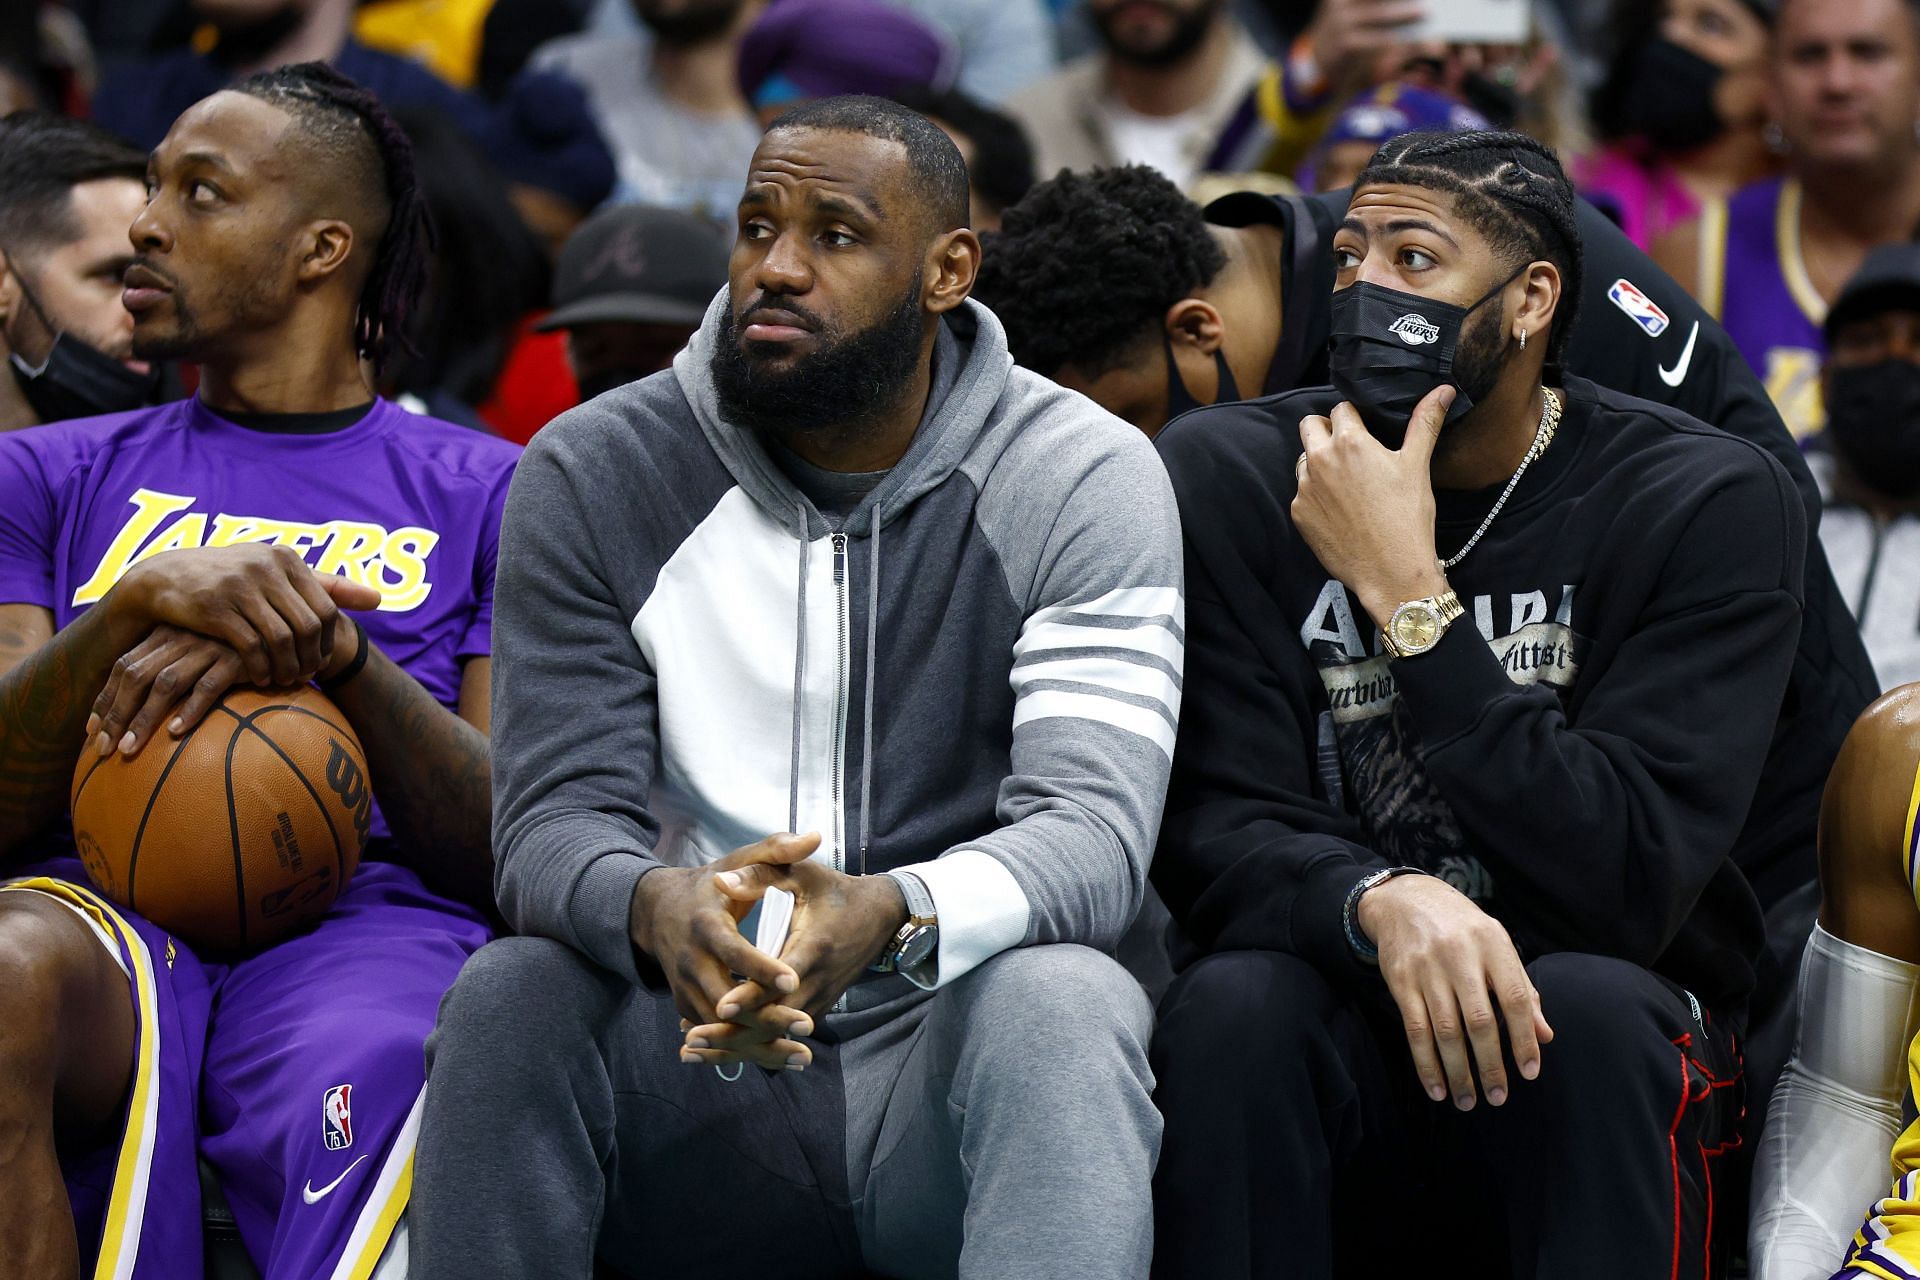 LeBron James #6 and Anthony Davis #3 of the Los Angeles Lakers look on from the sideline